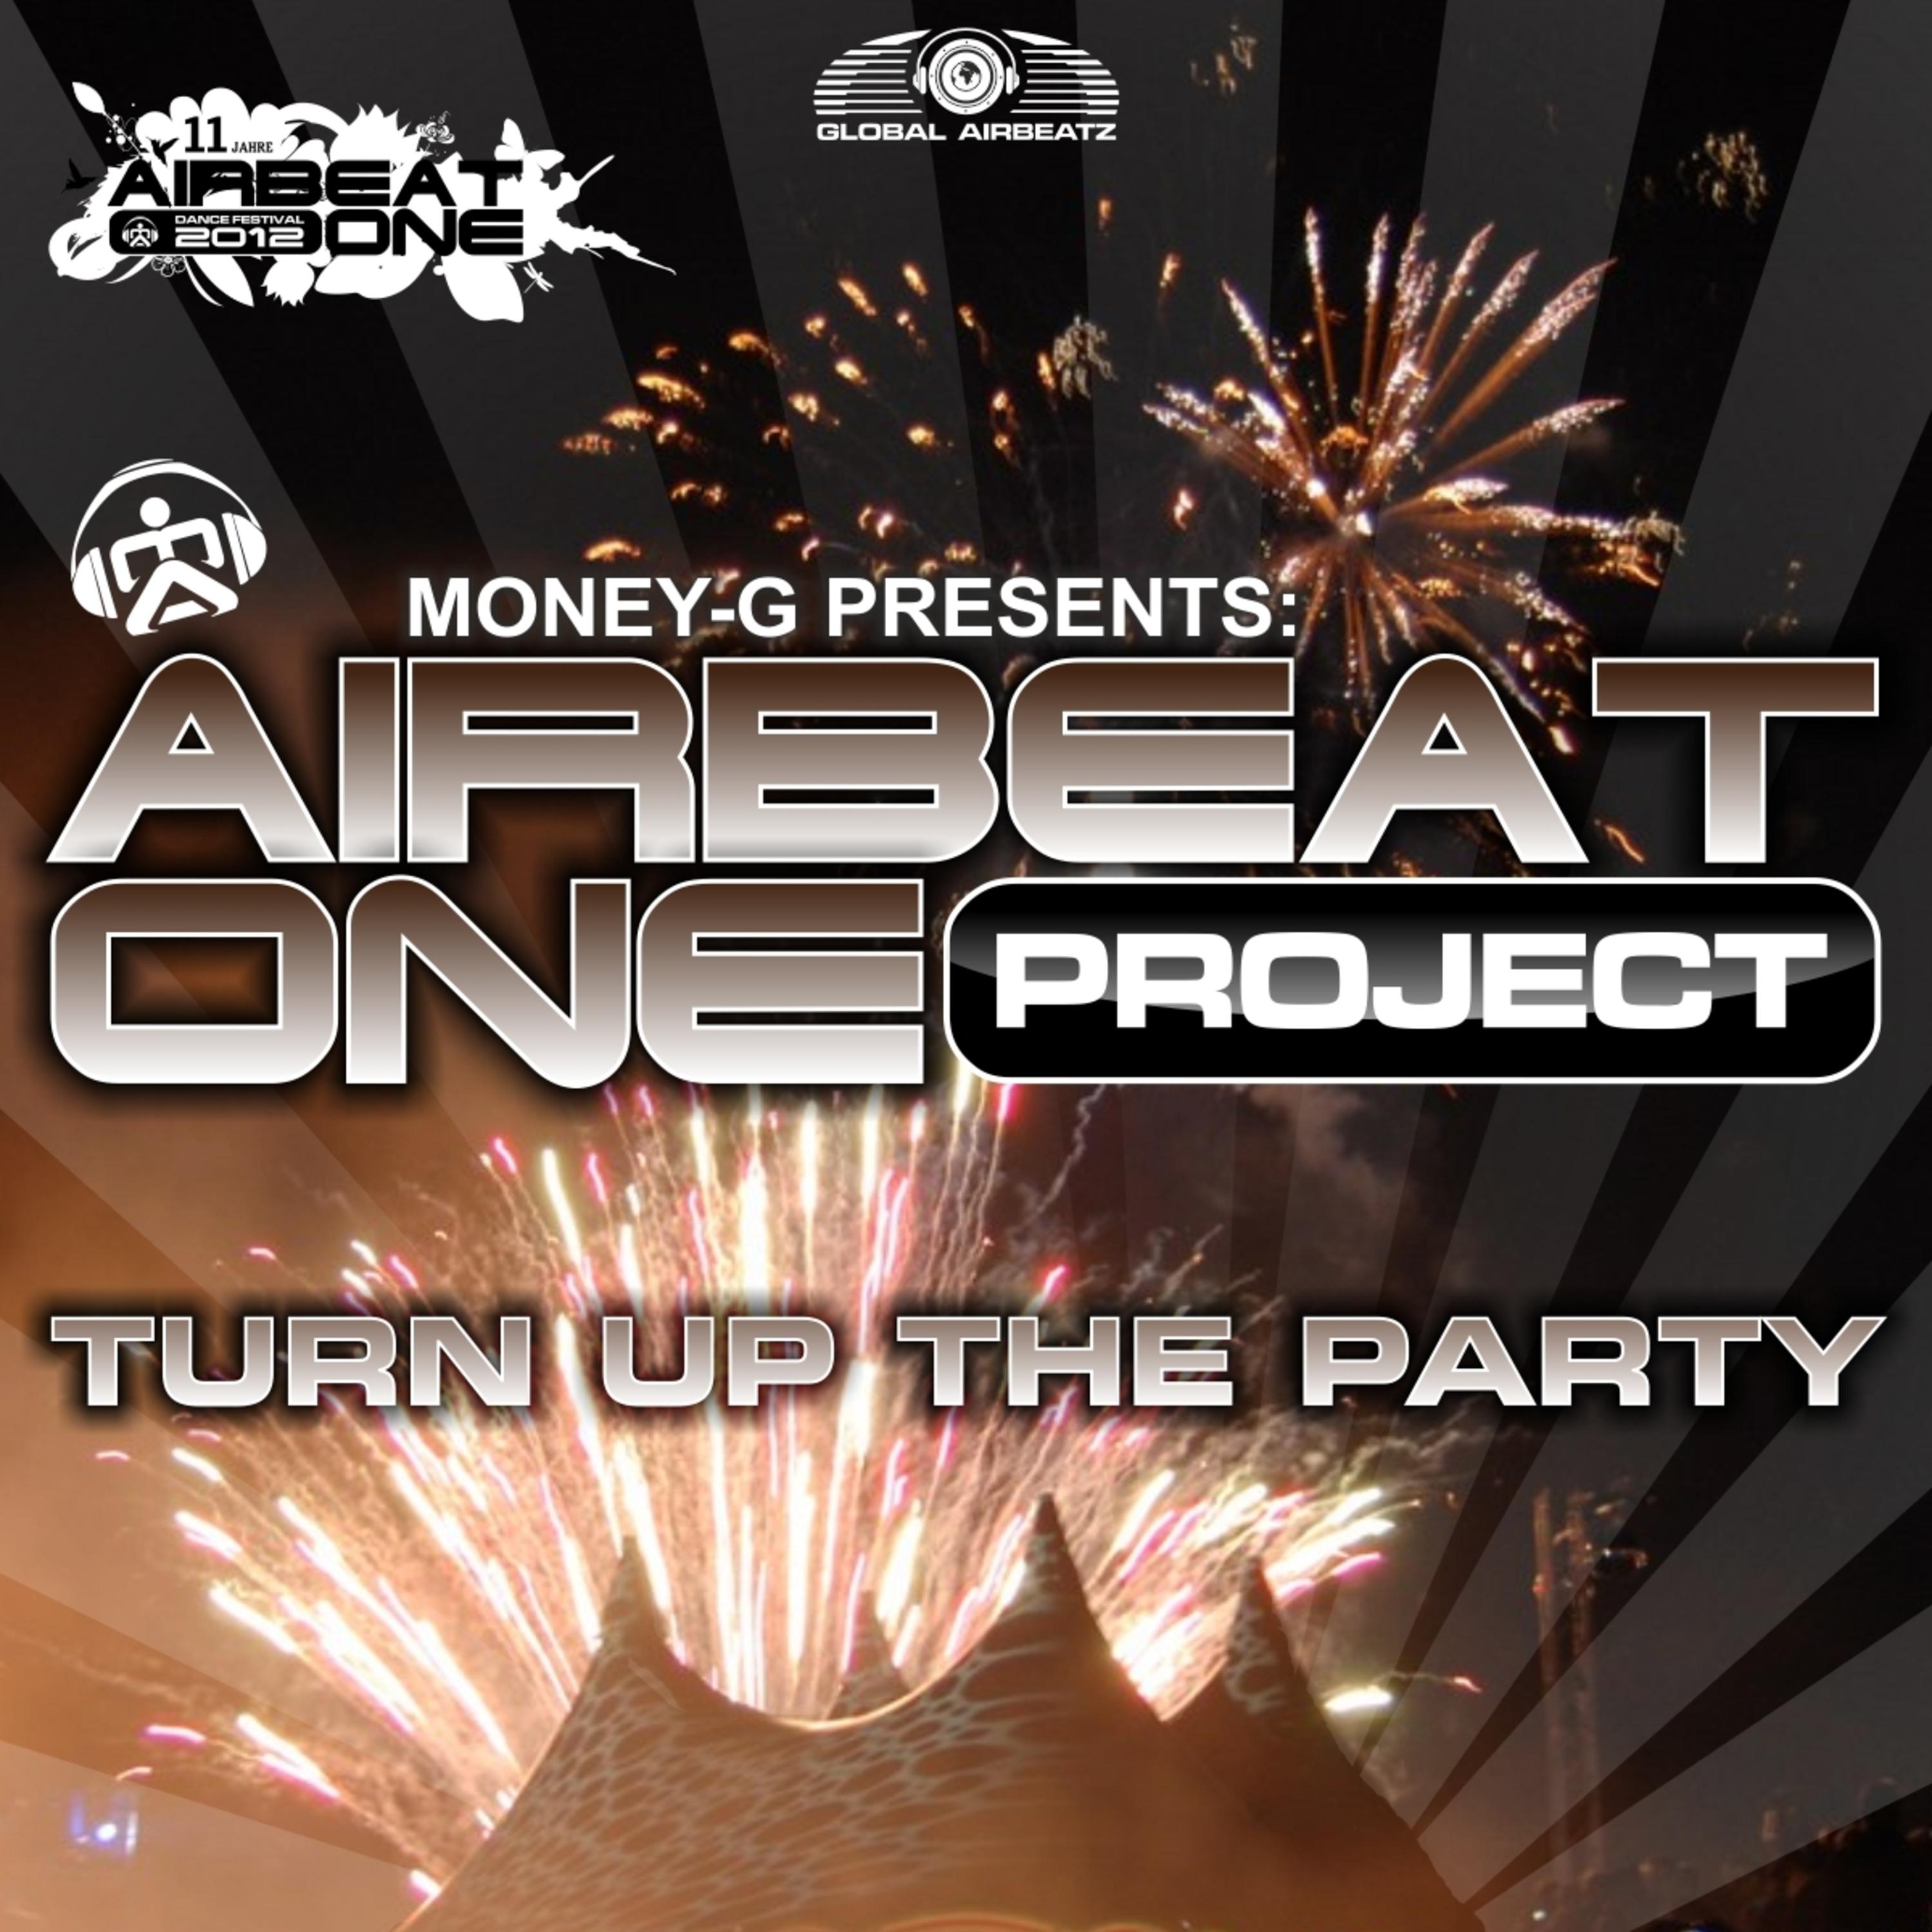 Turn up the Party (Money-G Mix)